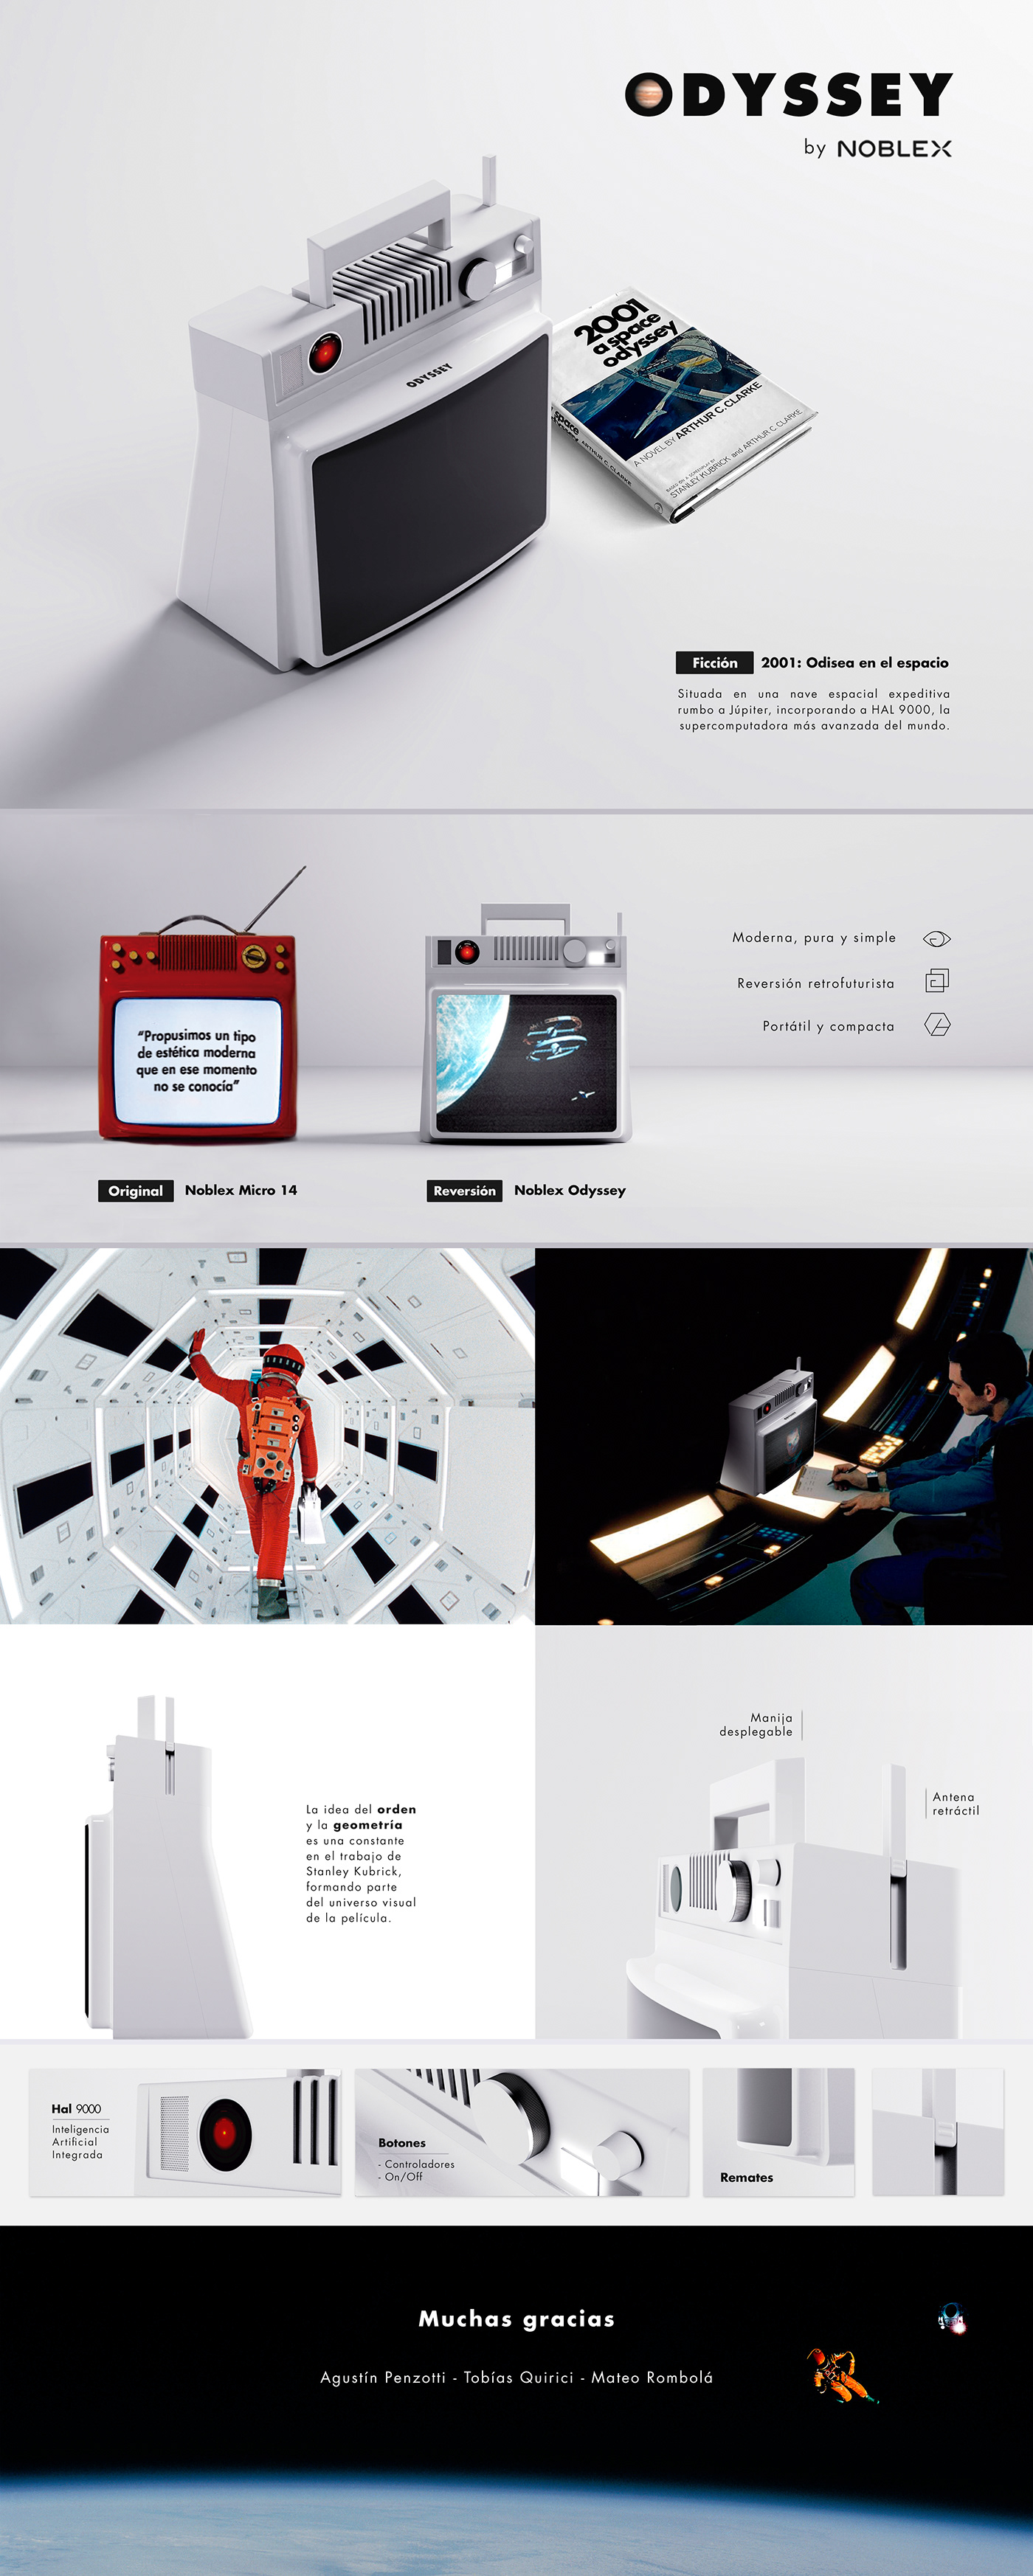 2001 space odyssey Movies Kubrick industrial design  tv Space  portable product design  Render futuristic